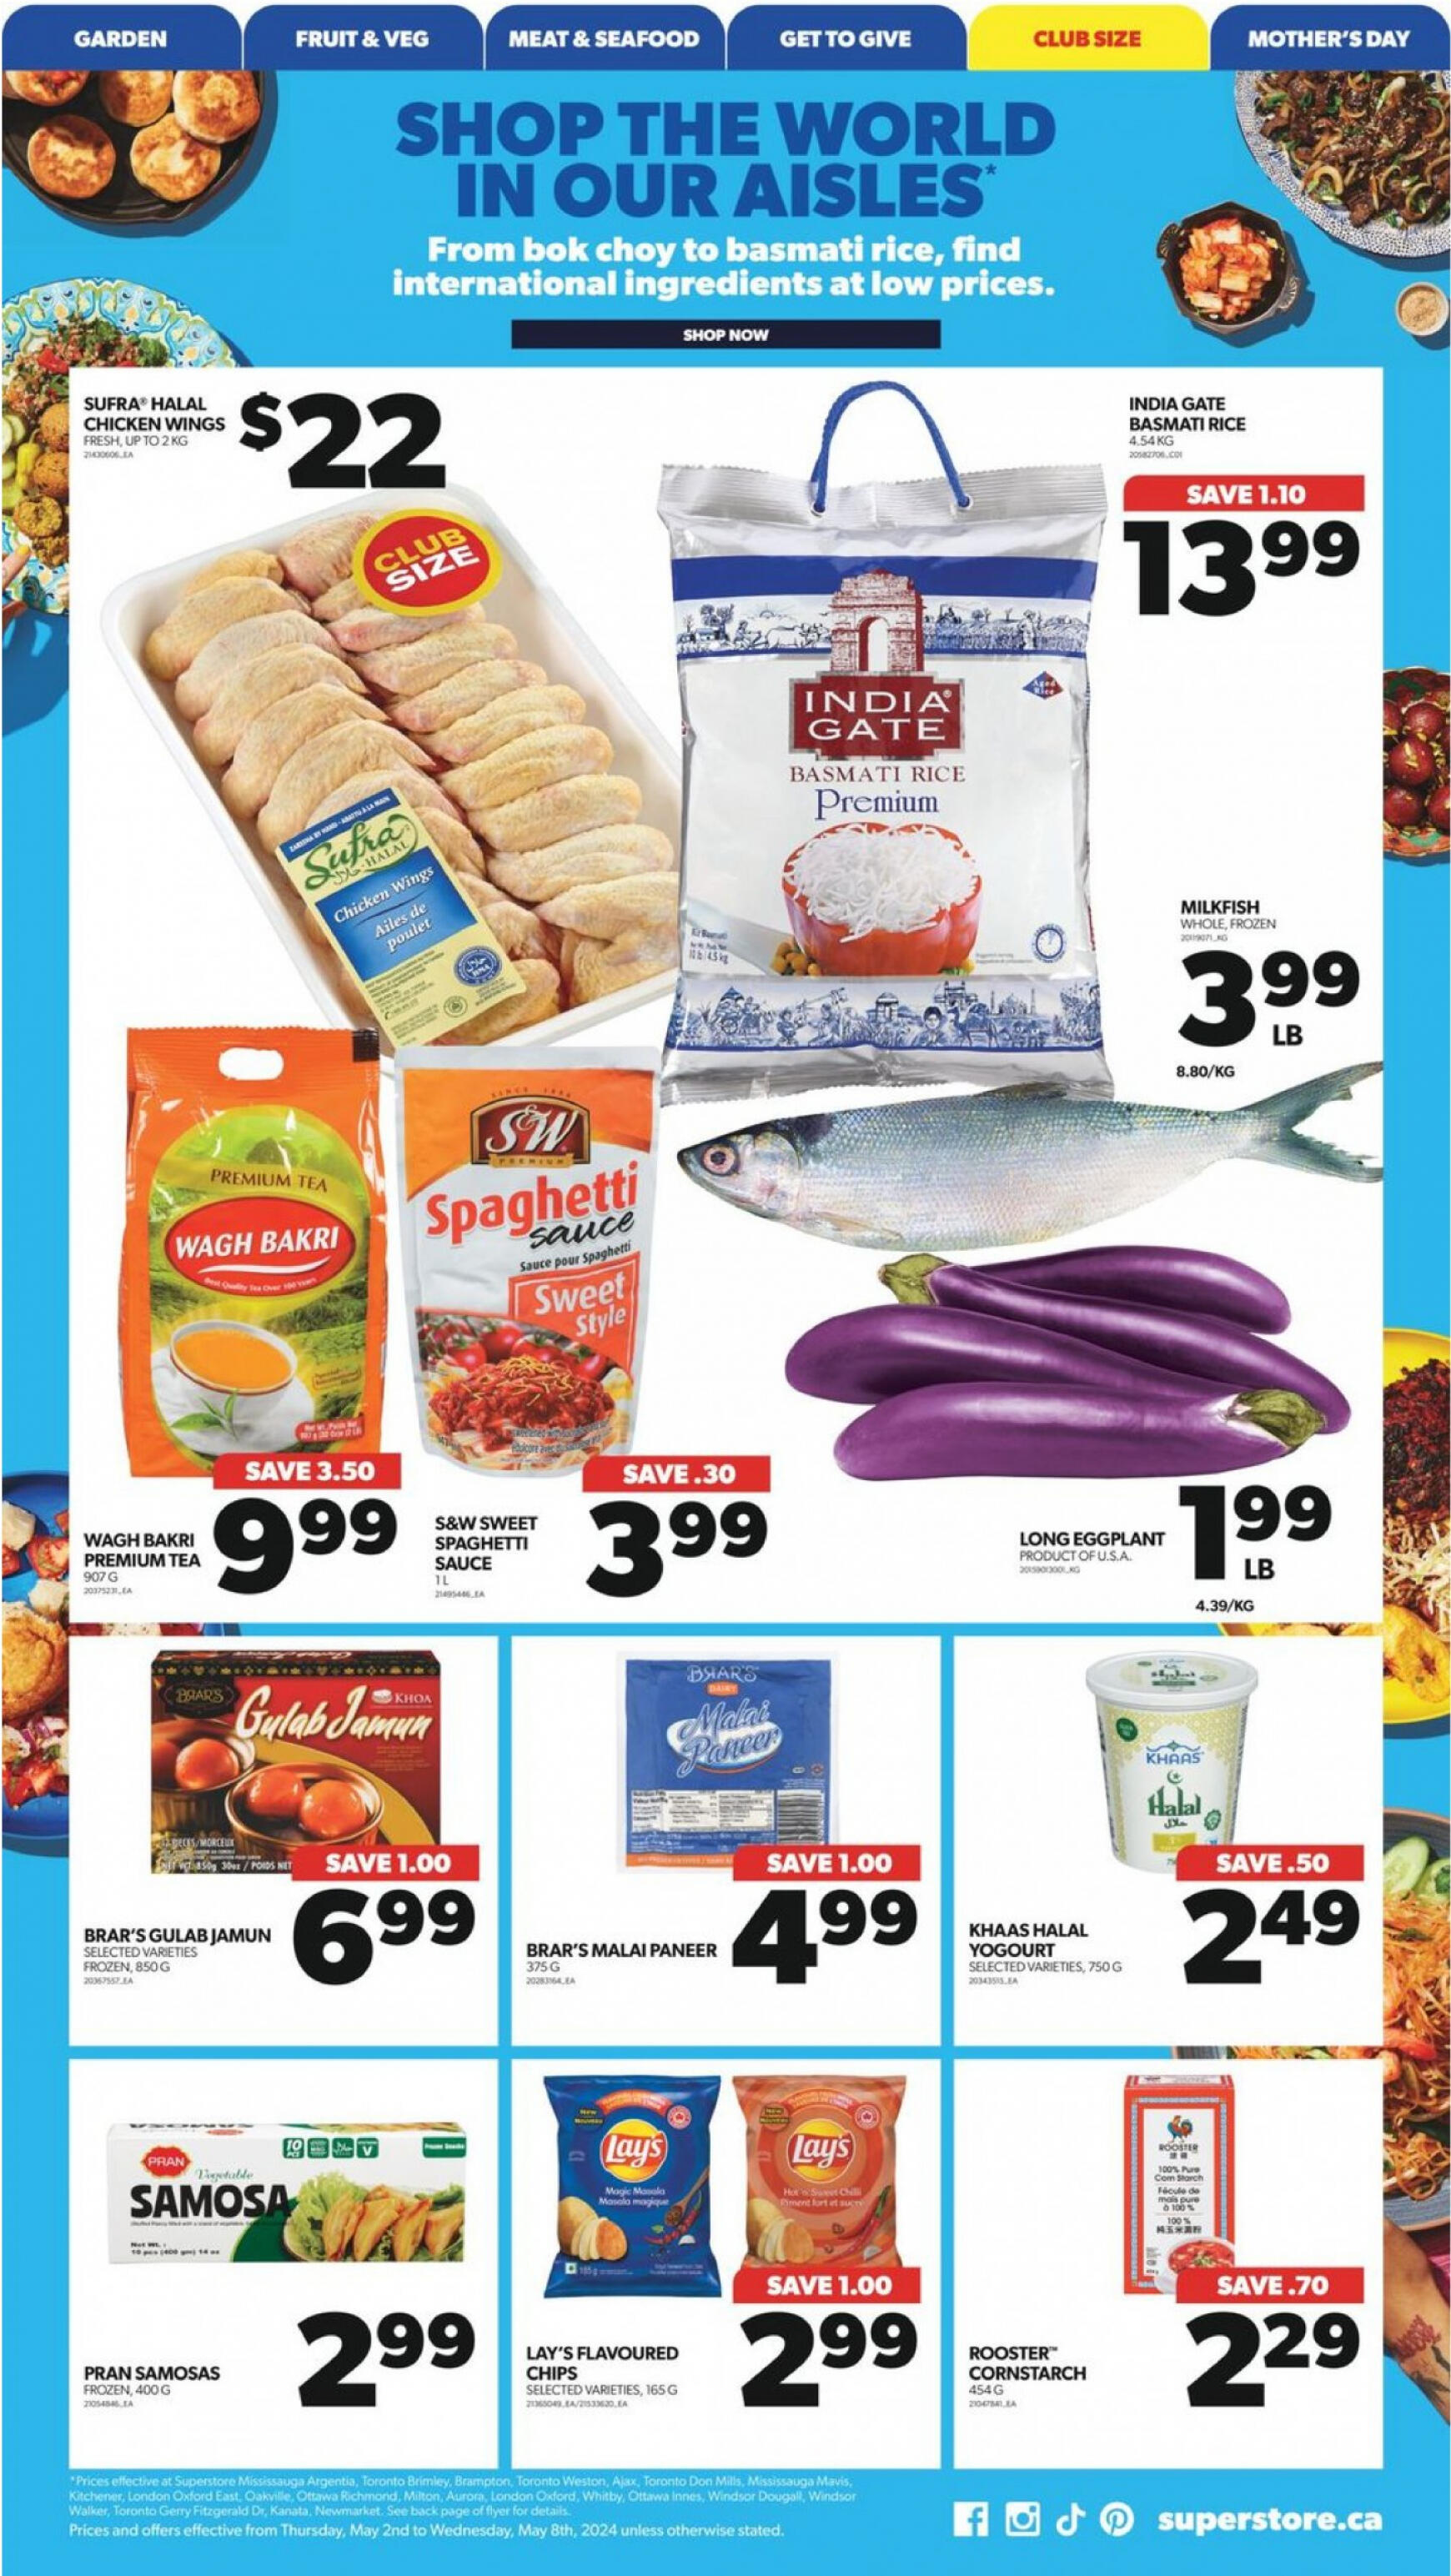 real-canadian-superstore - Real Canadian Superstore flyer current 02.05. - 08.05. - page: 38